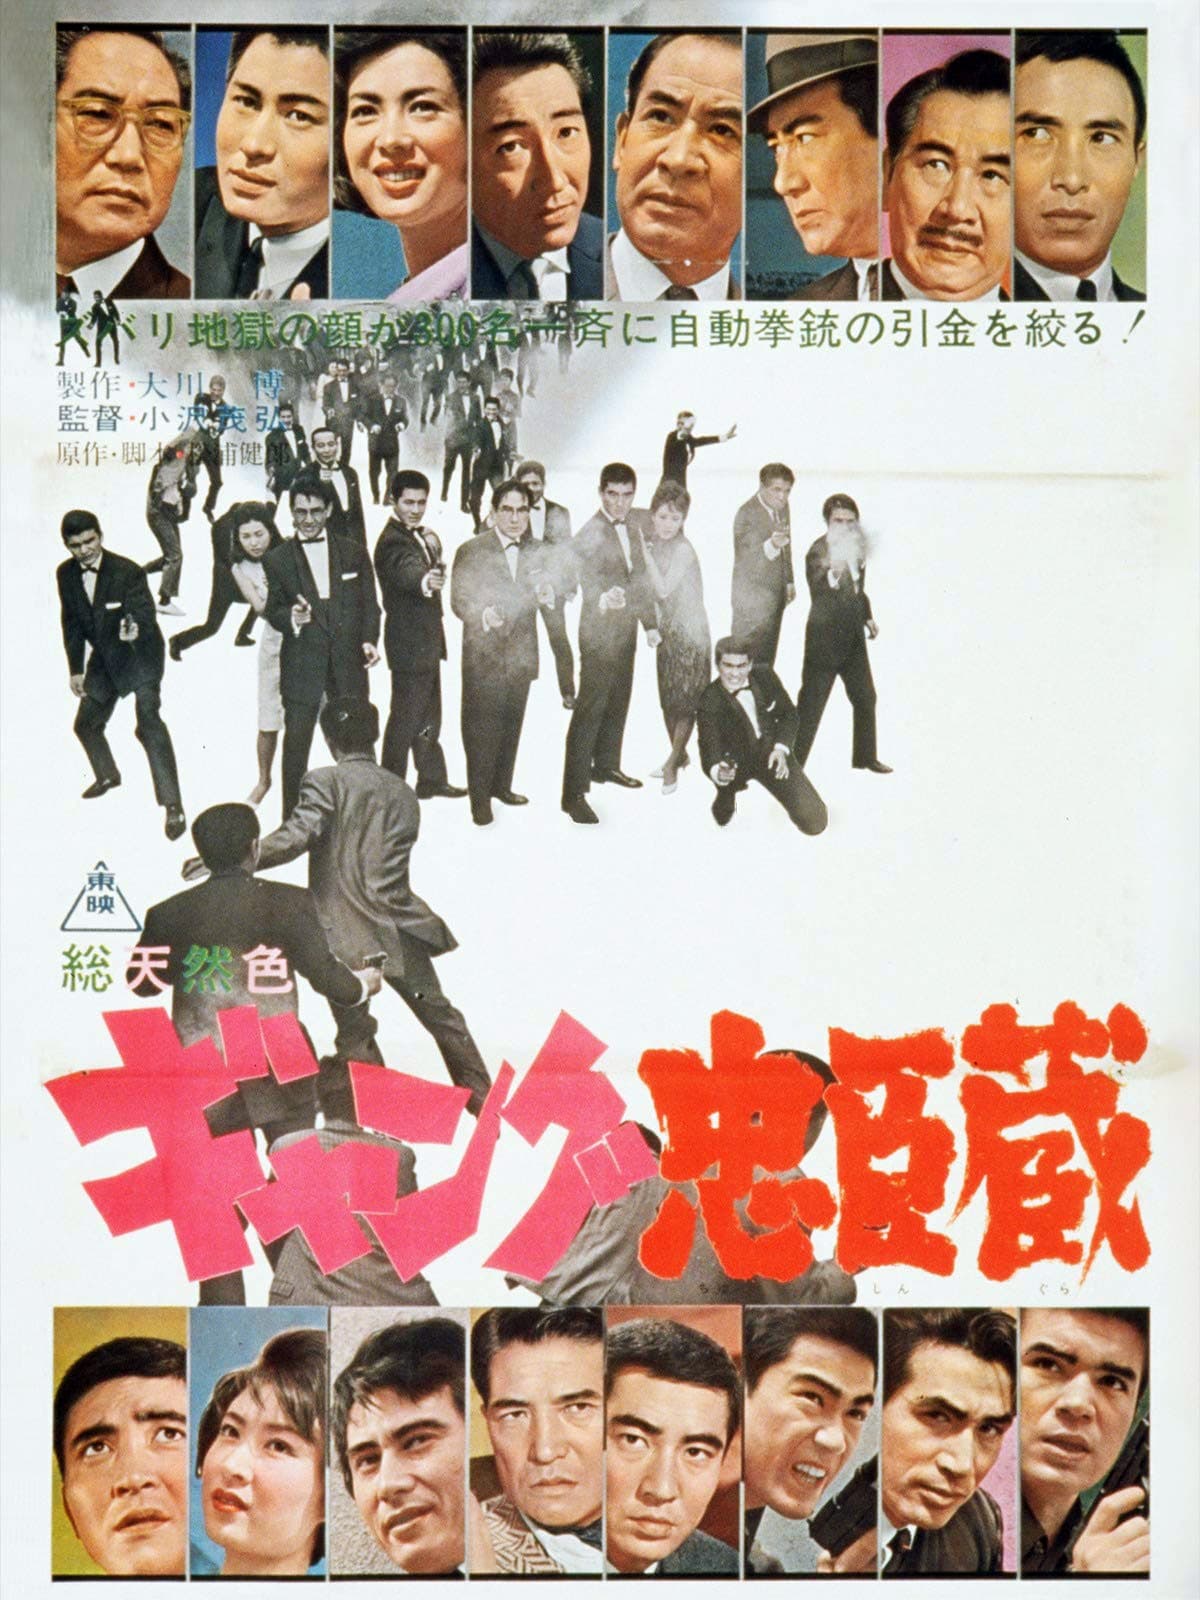 Gang Loyalty and Vengeance (1963)